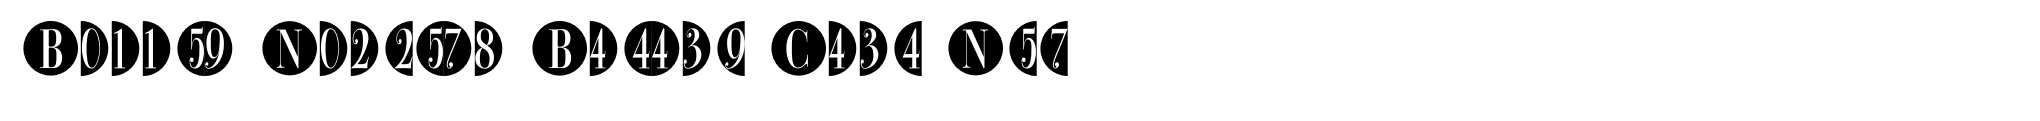 Bullet Numbers Bodoni Cond Neg image